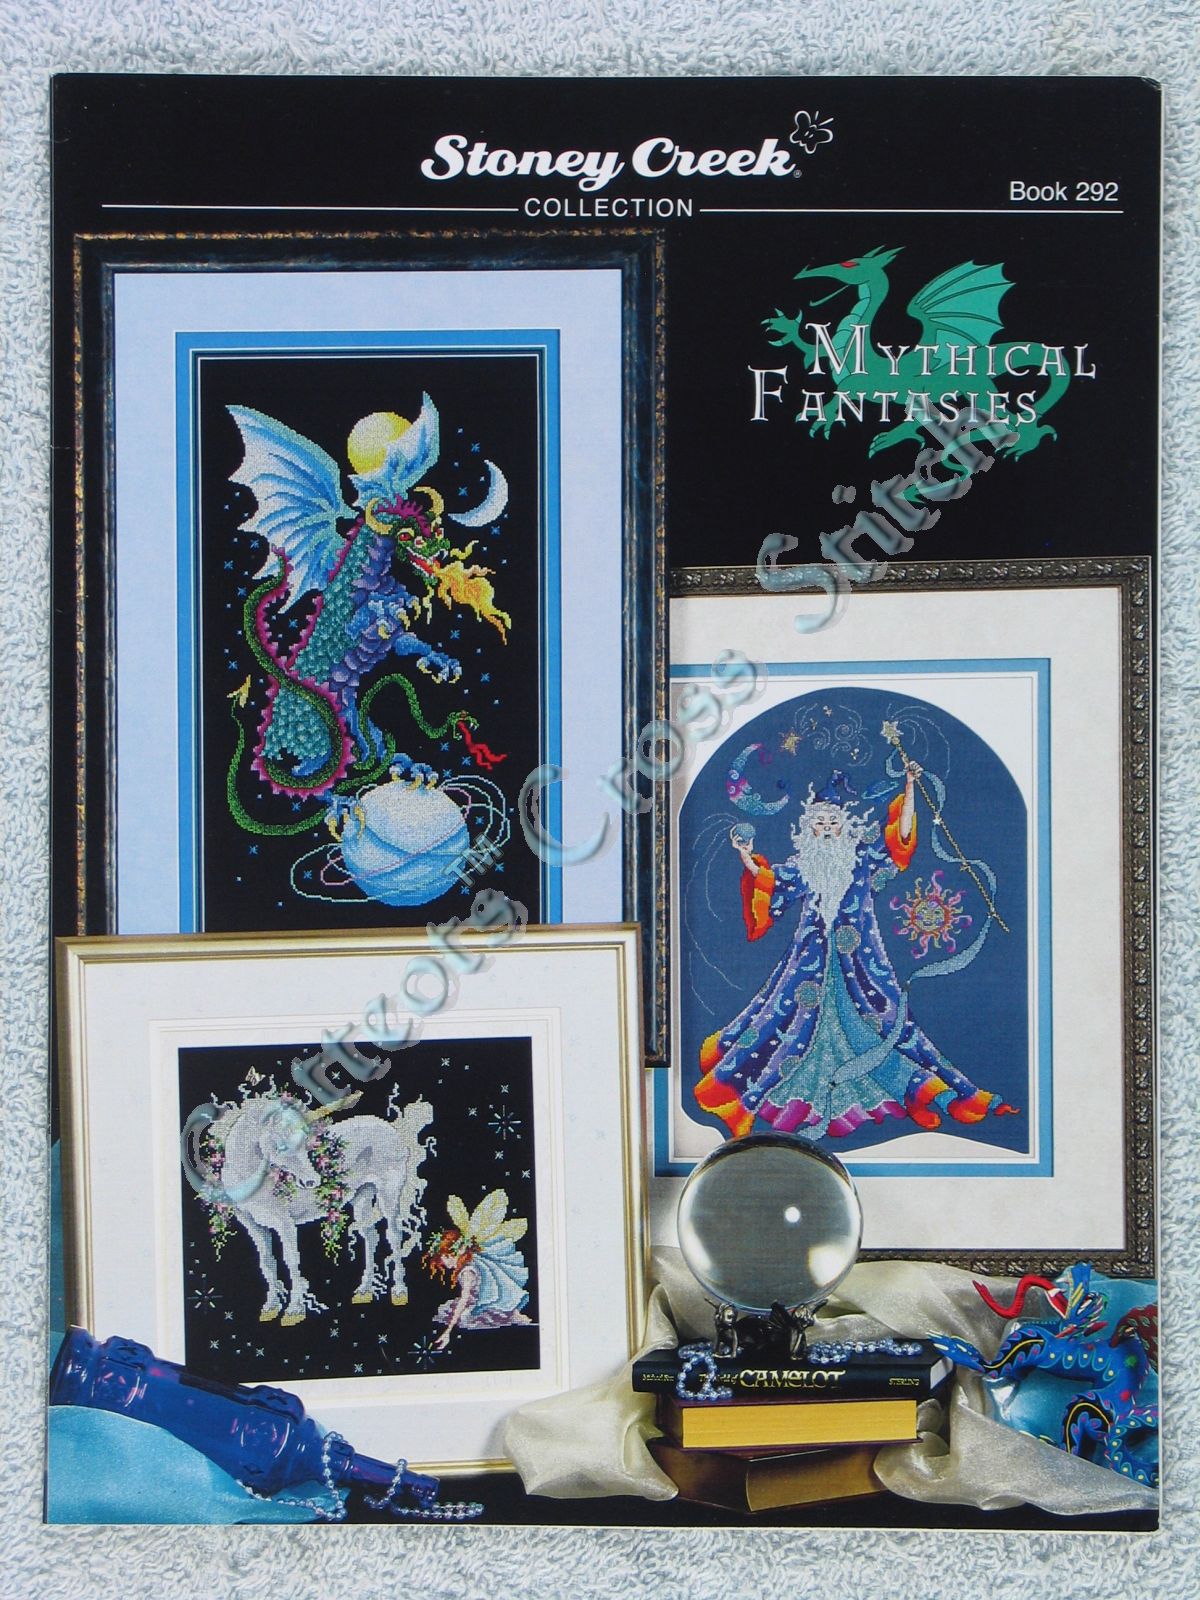 Wizards /& Faries Cross Stitch Book 292 Stoney Creek Mythical Fantasies Dragons